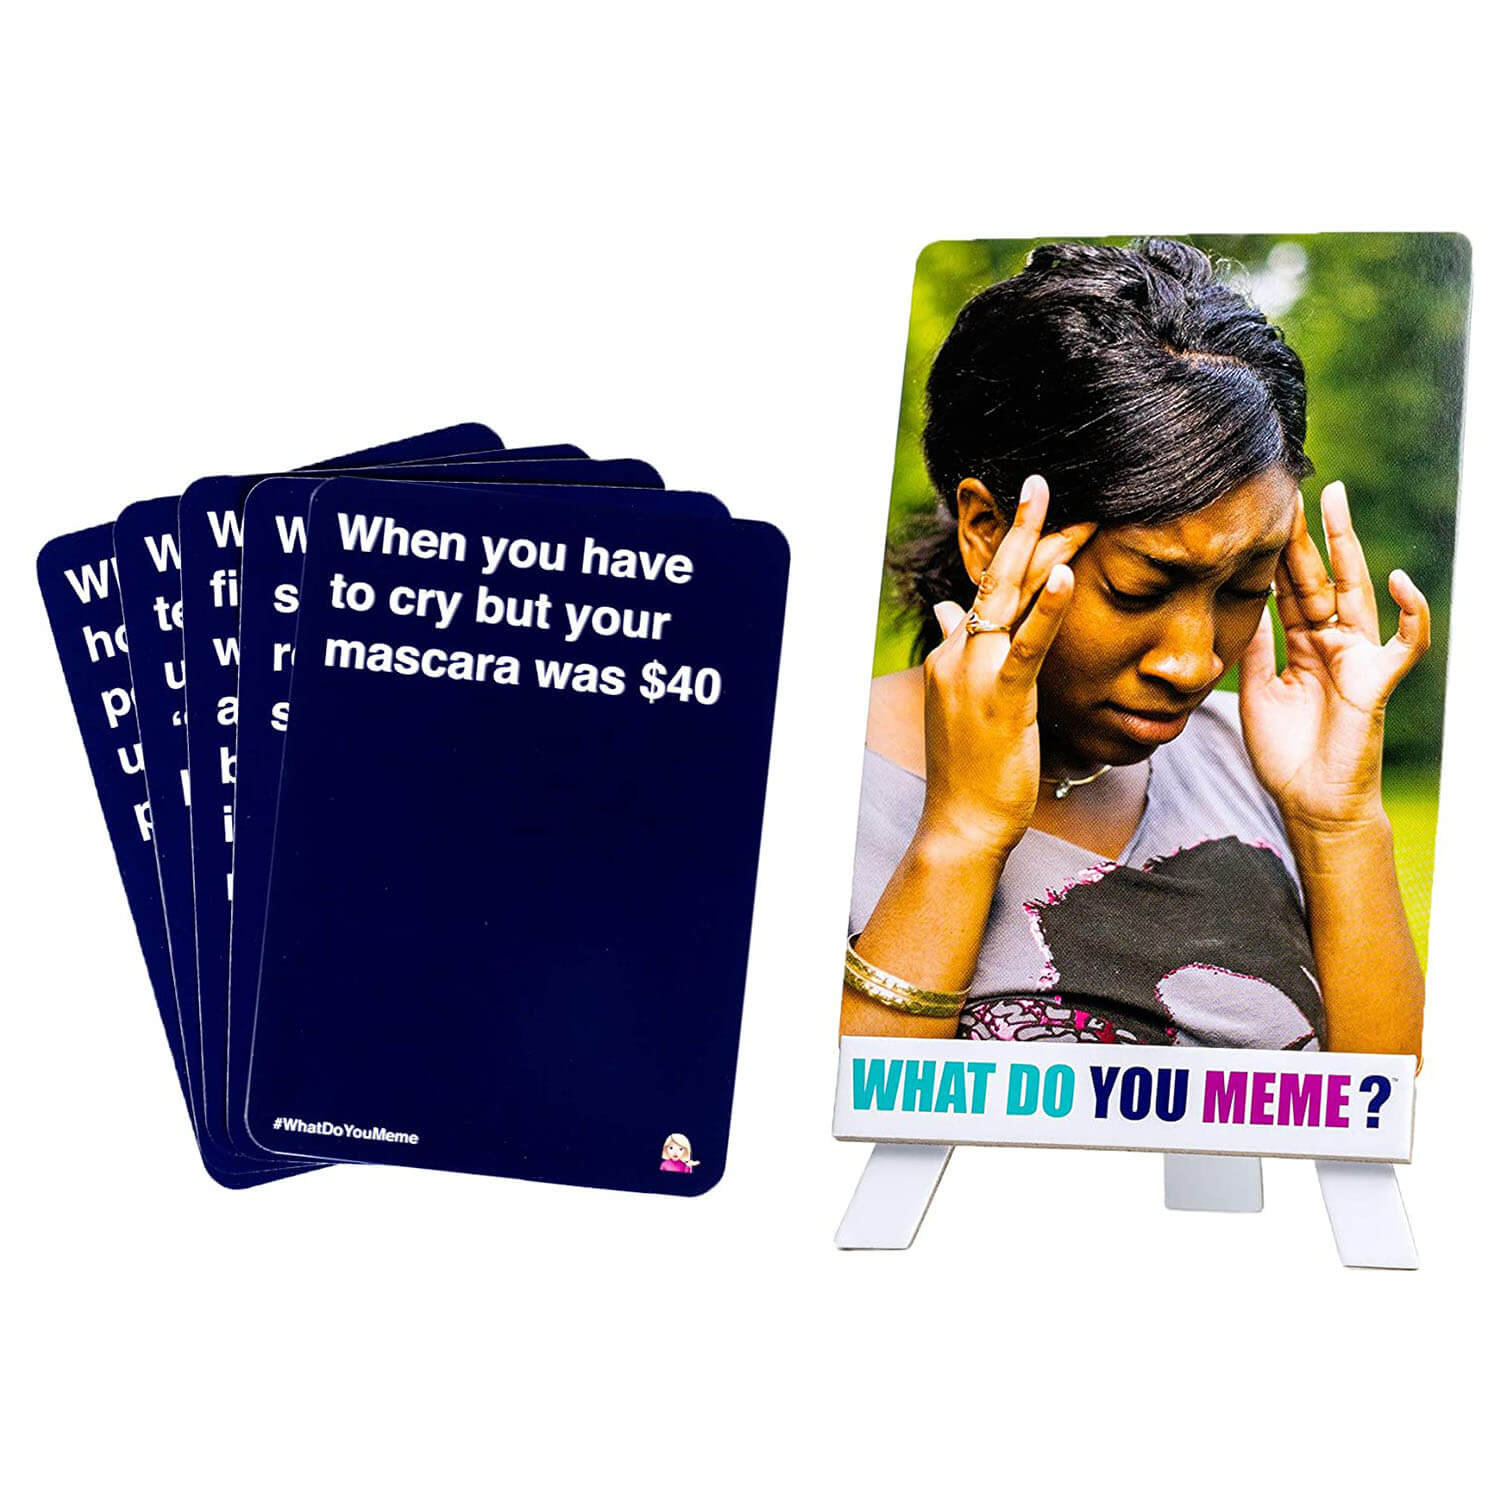 What Do You Meme Basic Bitch Expansion cards show woman thinking and "When you have you have to cry but your mascara was $40"